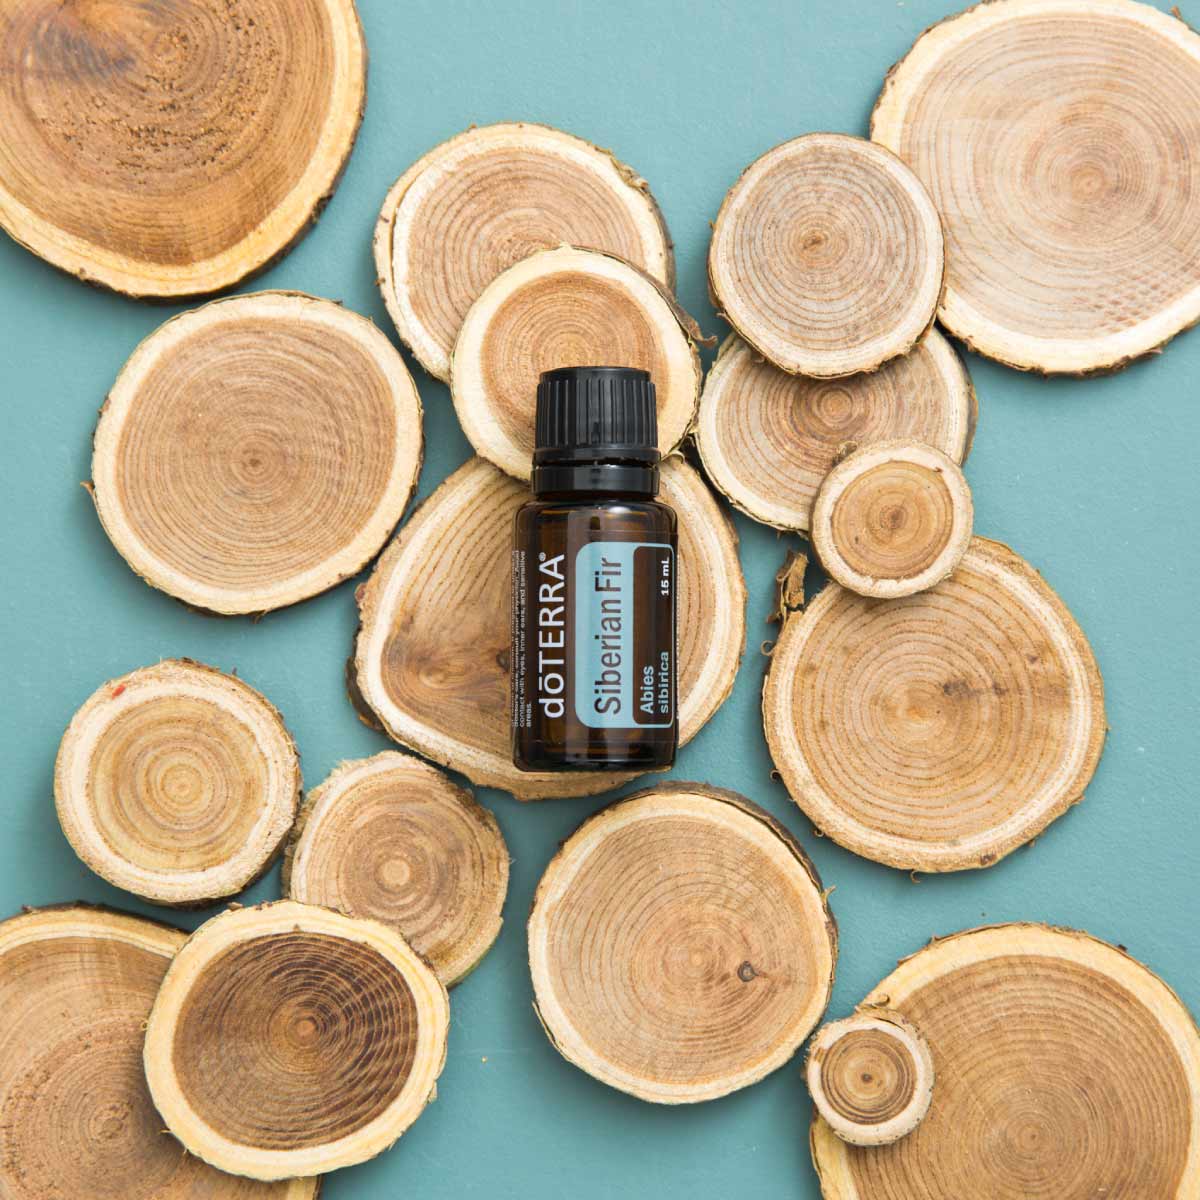 Bottle of doTERRA Siberian Fir essential oil surrounded by slabs of wood. What oil blends well with Siberian Fir oil? Siberian Fir oil blends well with citrus essentail oils like Wild Orange and Grapefruit oil.